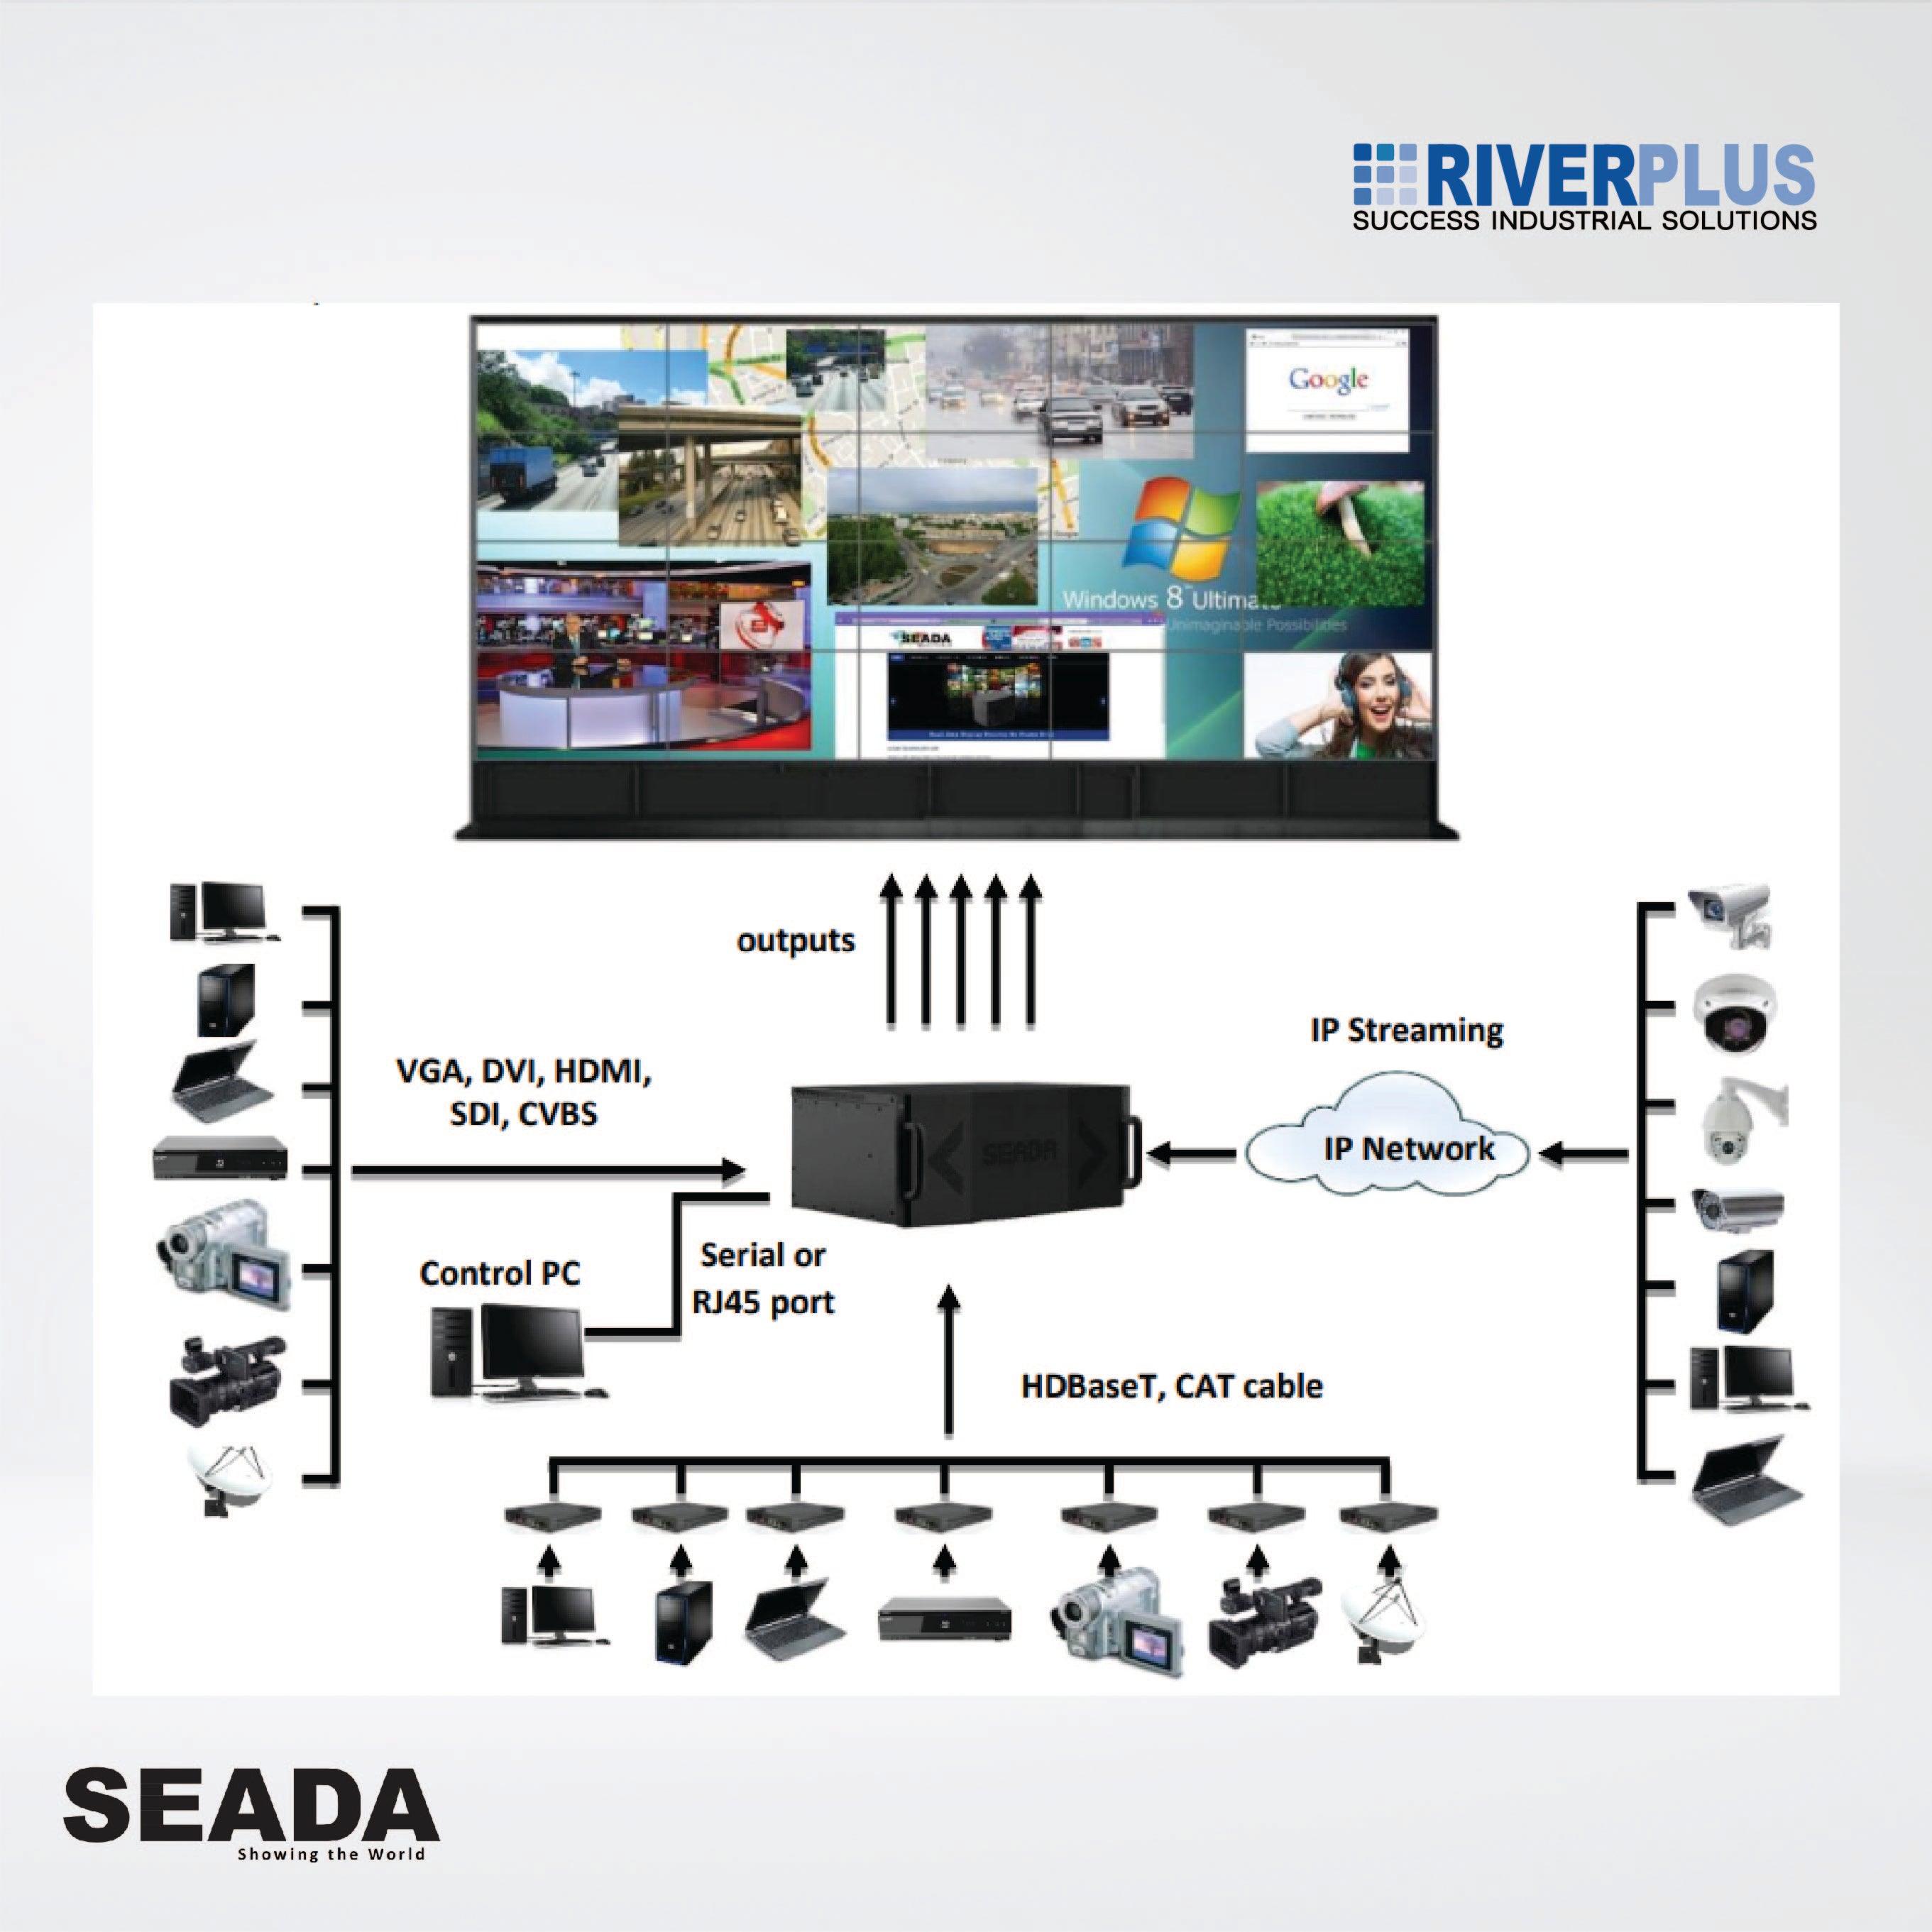 SWP10 CHASSIS 10U, 76 INPUT/40 OUTPUT ,Video wall controllers are the most Advanced solution - Riverplus